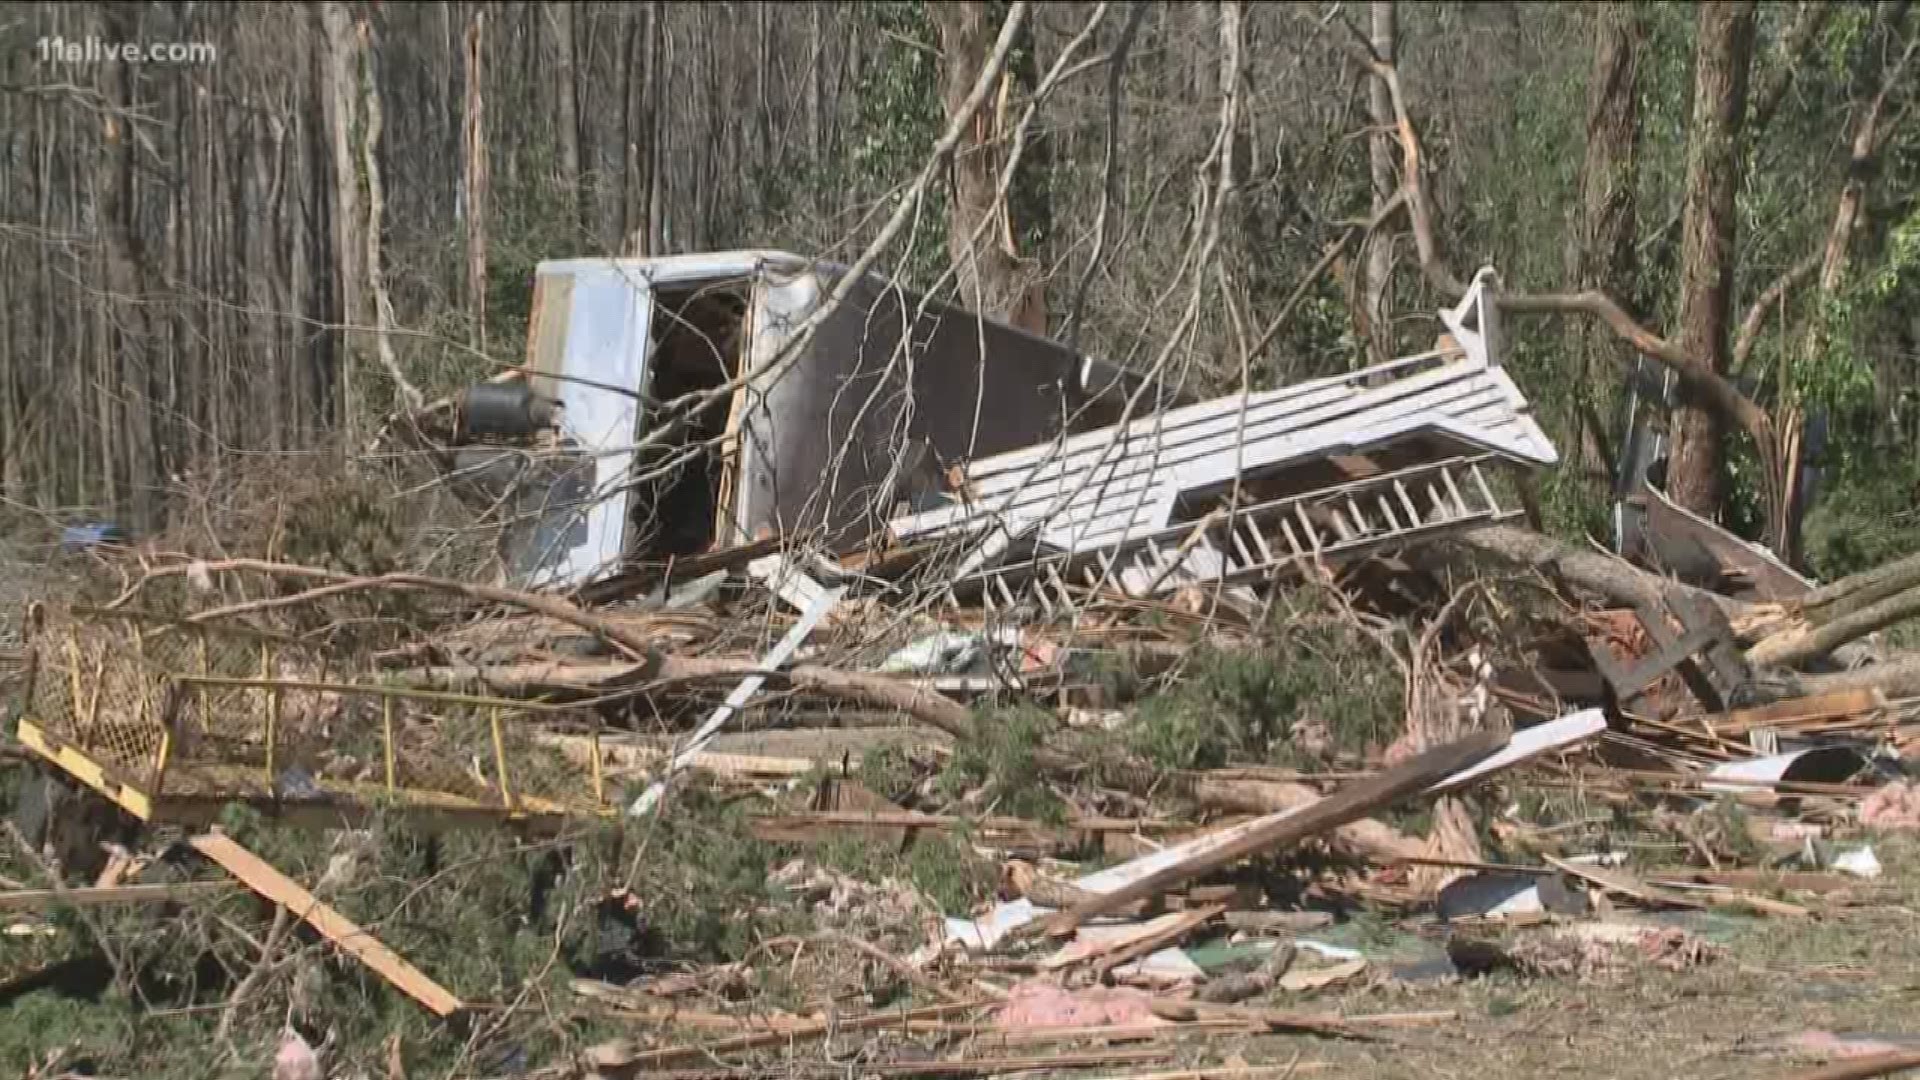 One area of Georgia hit by last week's storms did not have sirens